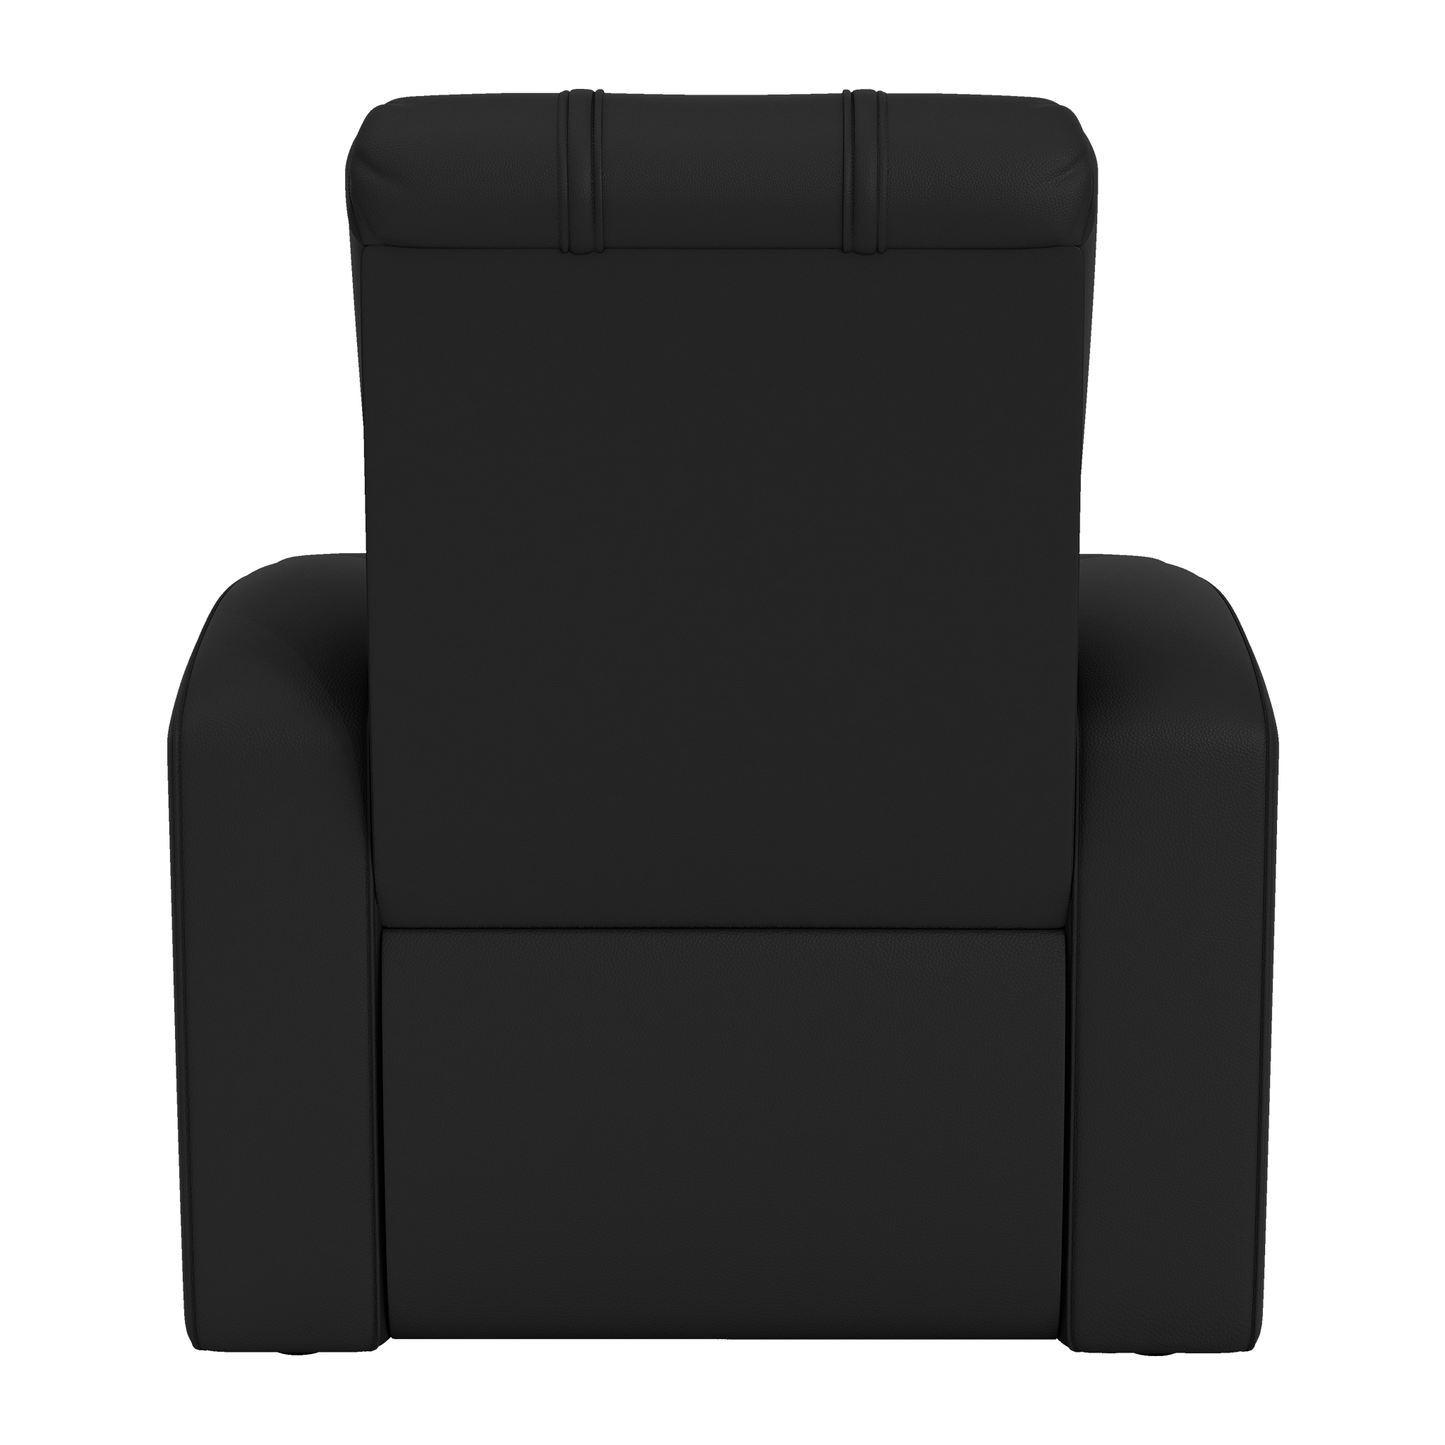 Relax Home Theater Recliner Miami Heat Logo